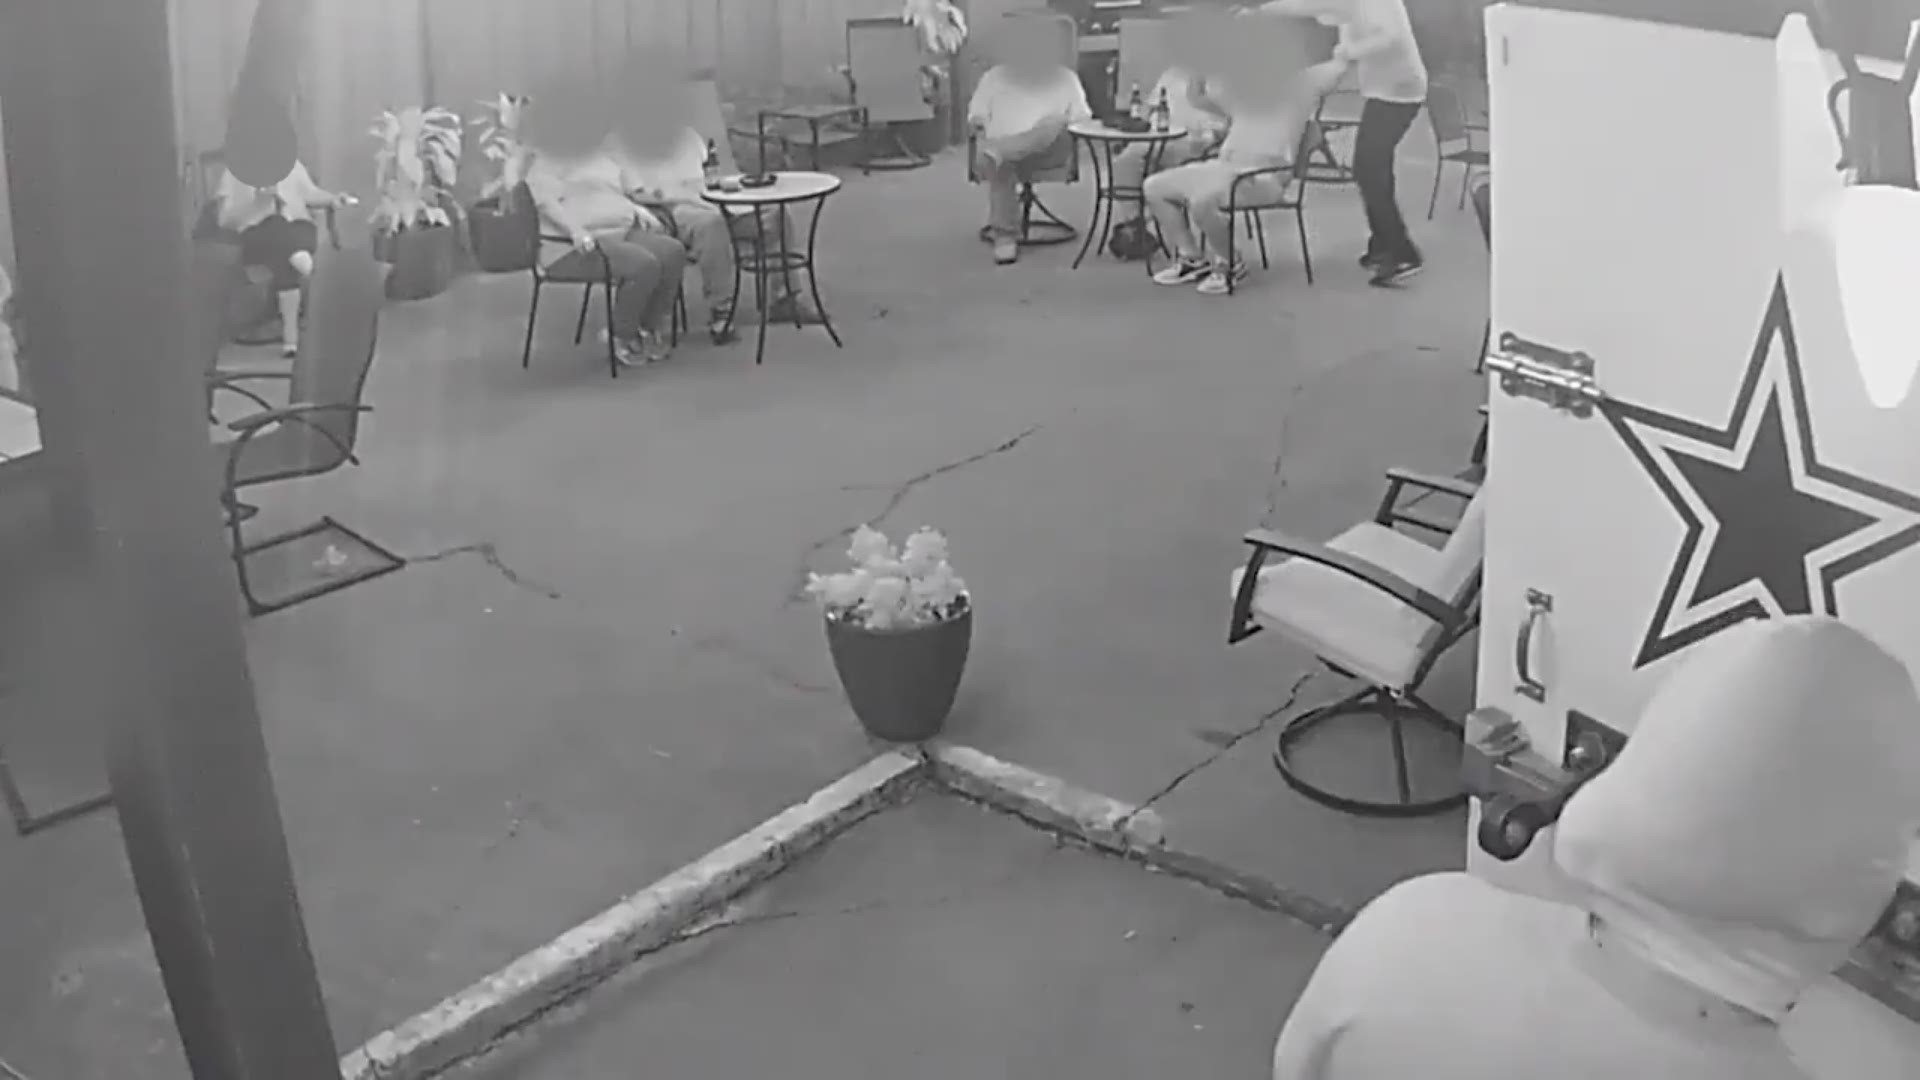 Surveillance video released by Fort Worth police shows suspect robbing the Los Vaqueros bar just before an officer was shot early Friday.